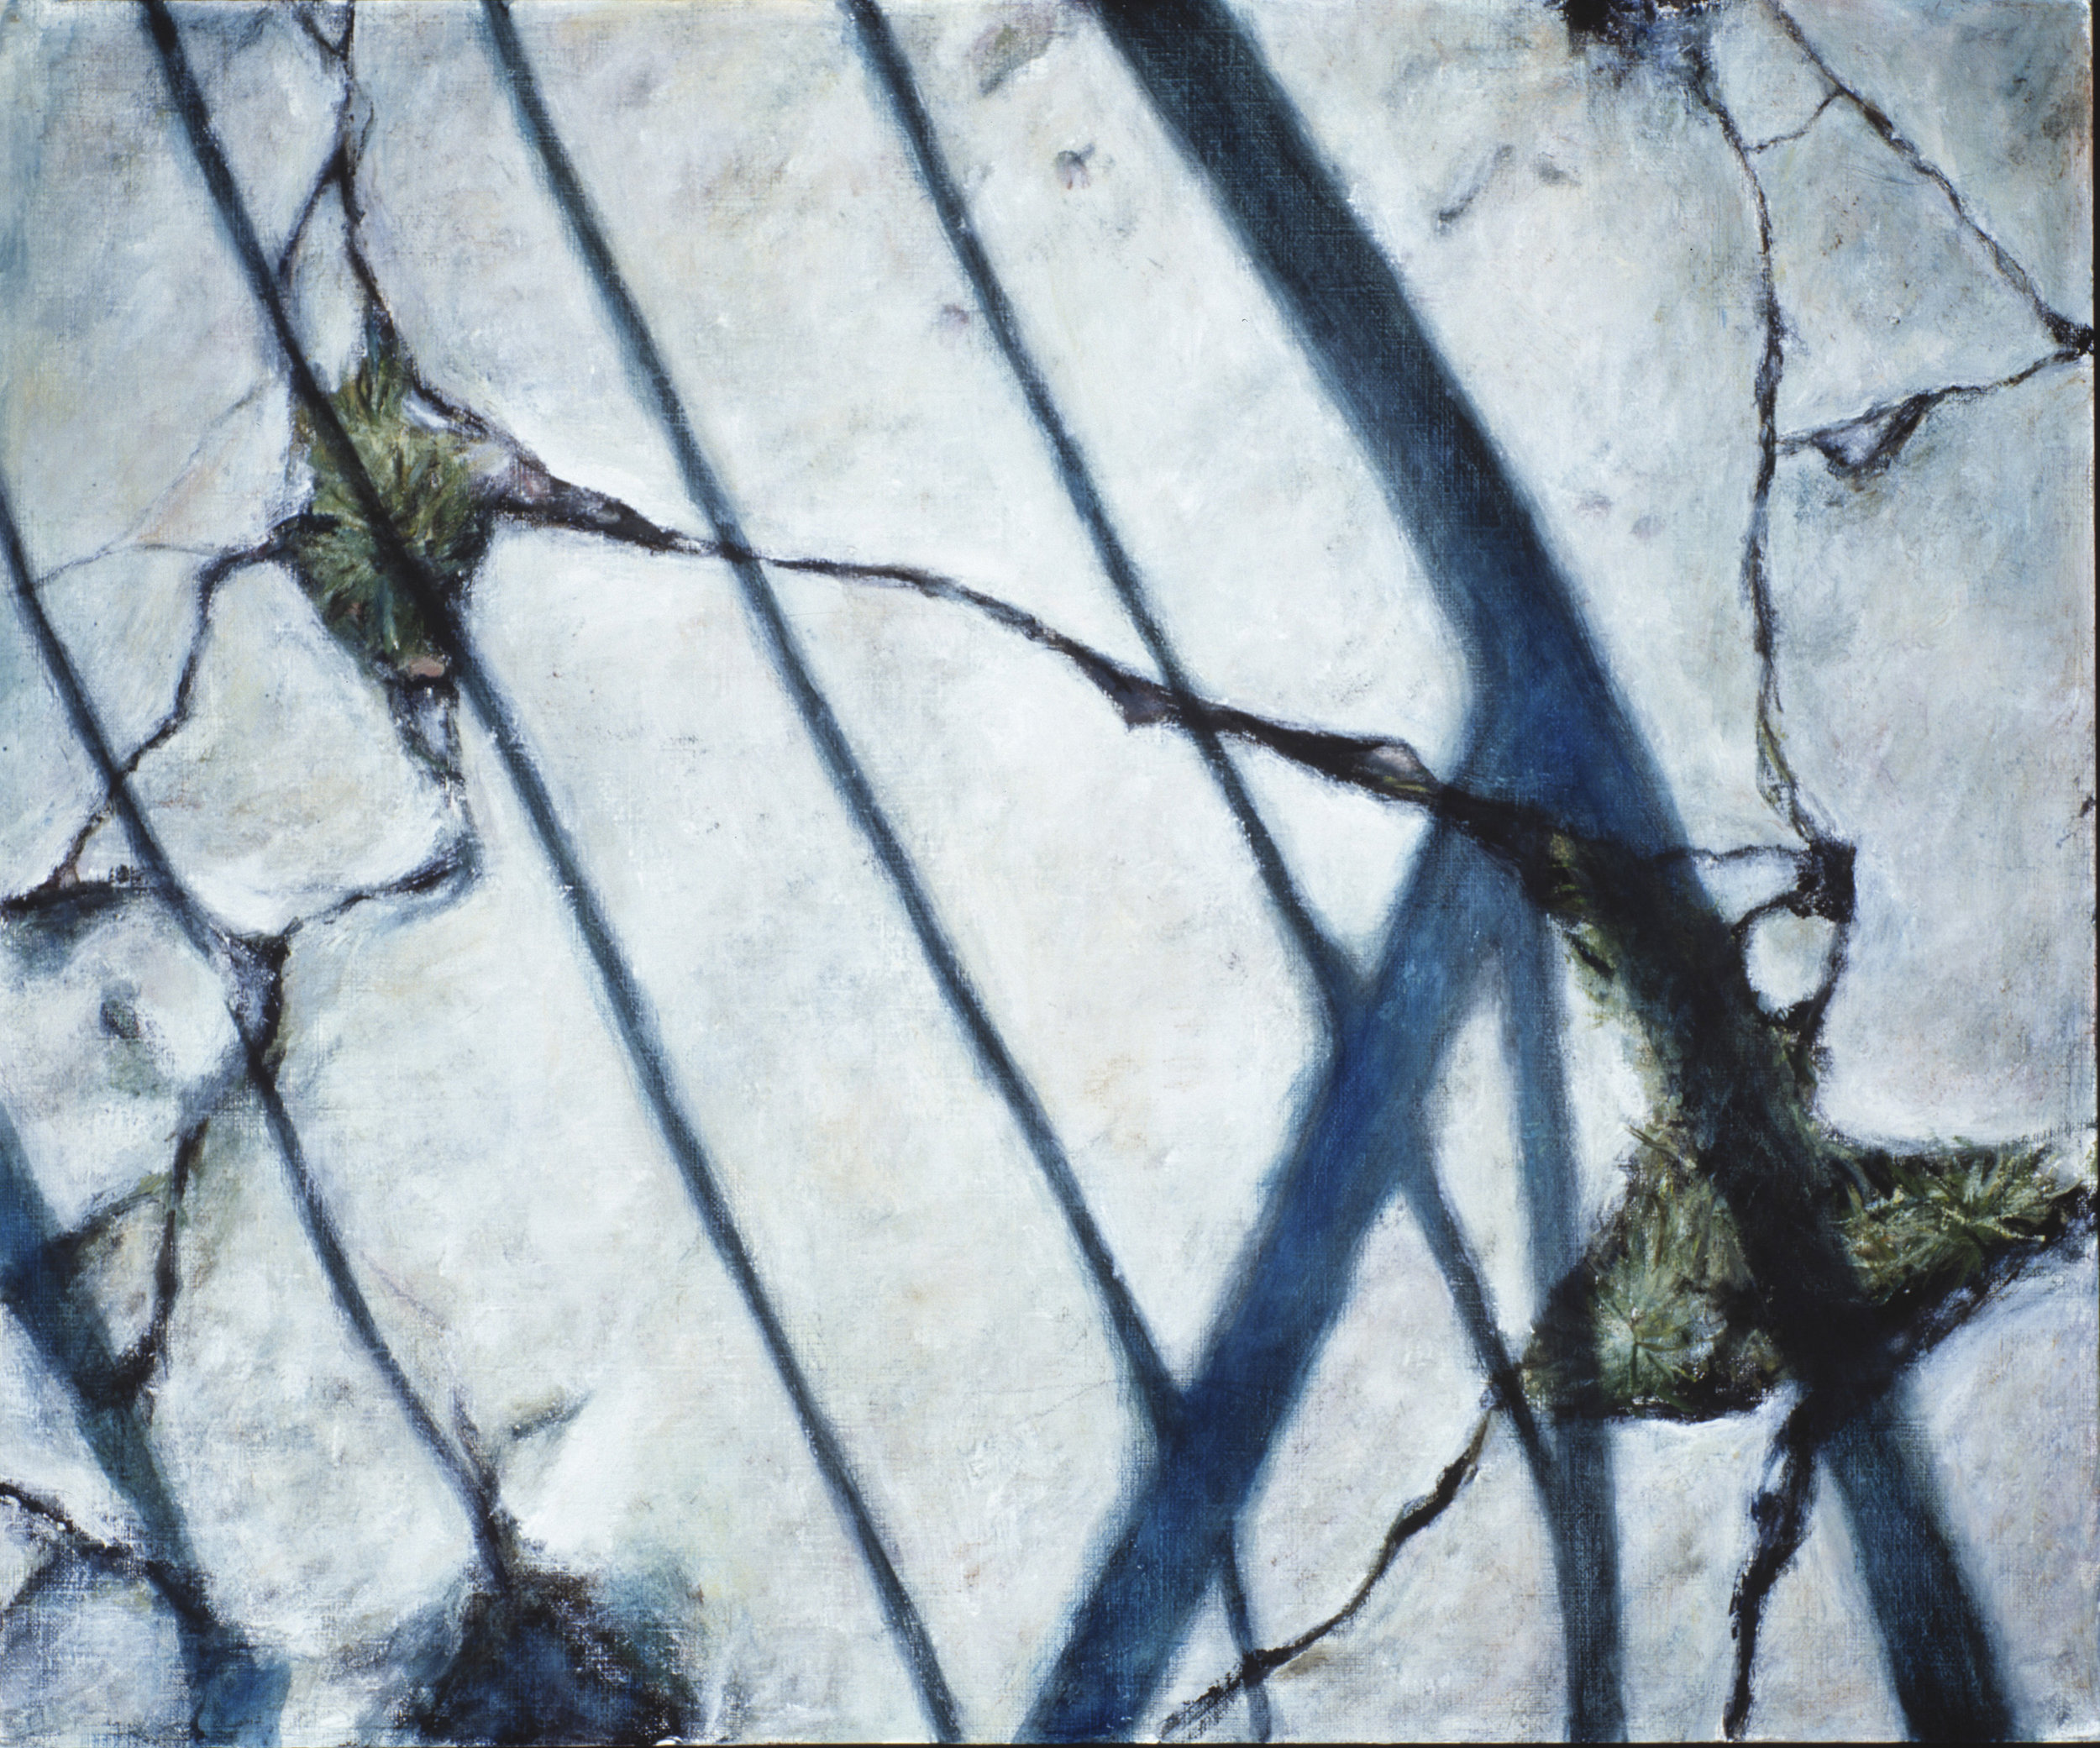   Exterior with cracks  Oil on paper 38x46 cm 2002 